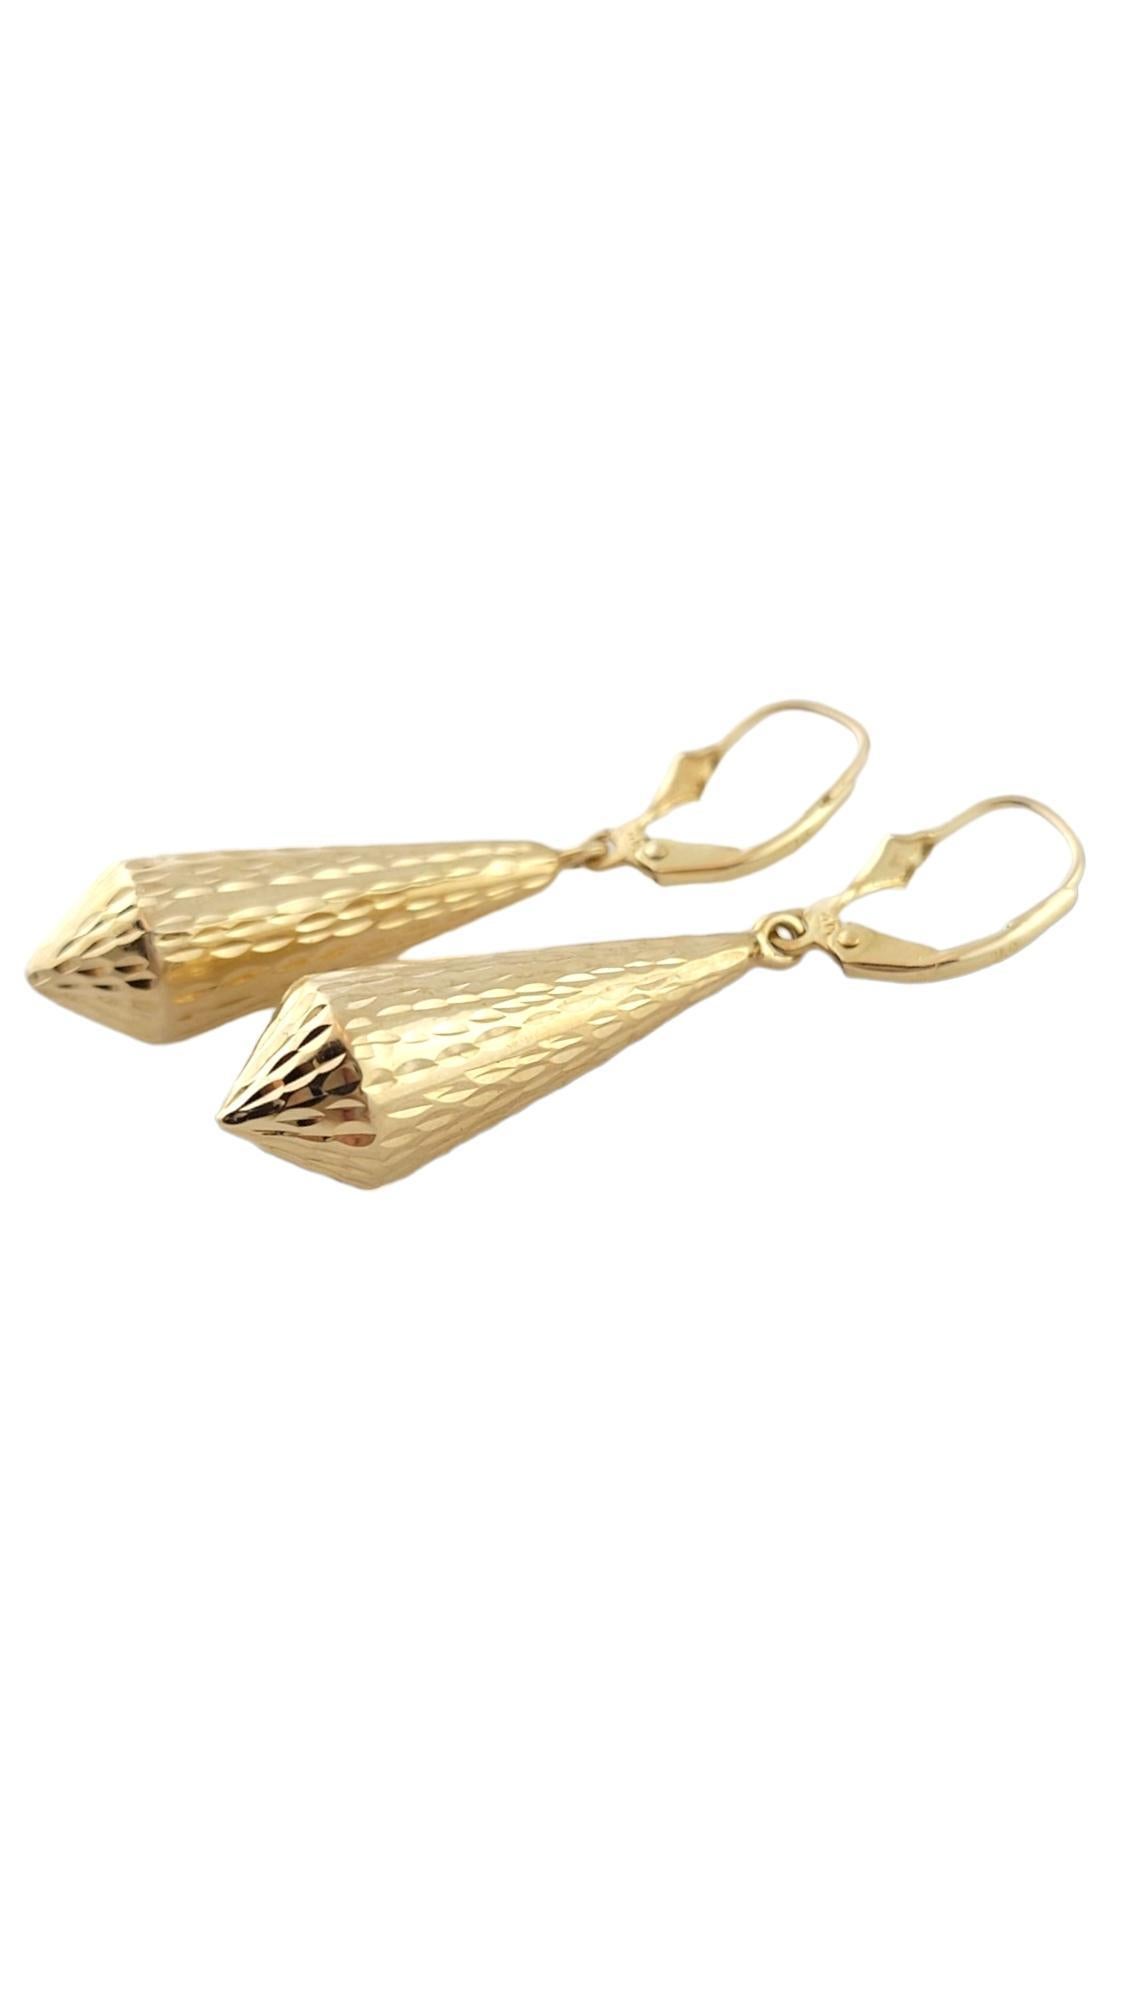 14K Yellow Gold Textured Dangle Earrings #16183 In Good Condition For Sale In Washington Depot, CT